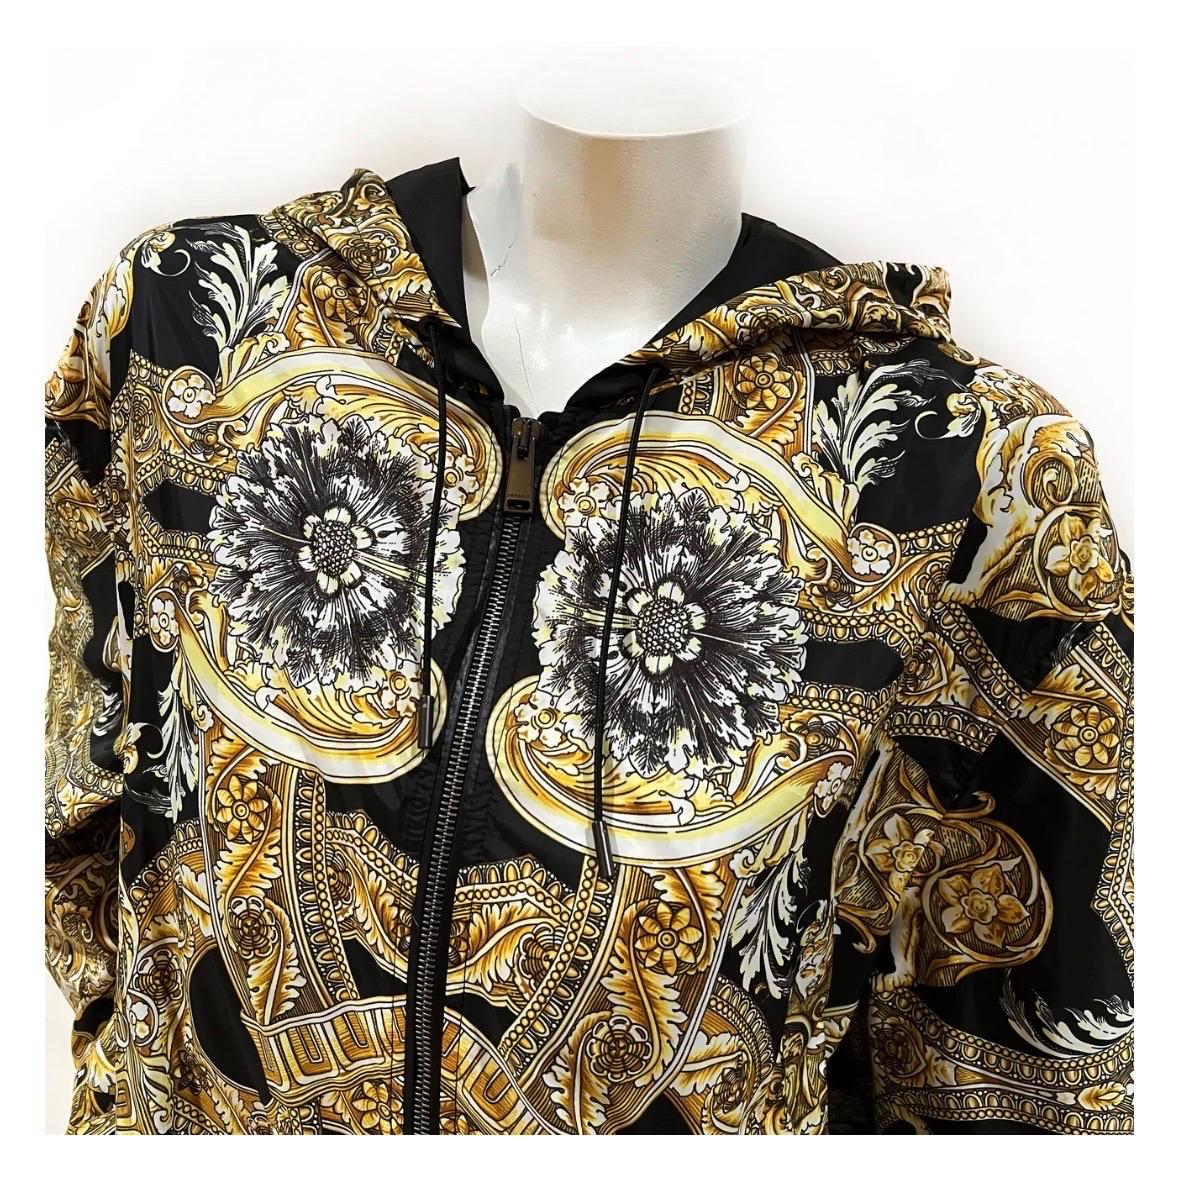 Baroque Hooded Windbreaker Jacket by Versace
2017 
Made in Italy
Black/gold
Baroque print throughout jacket
Front zip closure
Dual side pockets
Hood detail with drawstring closure
Bottom of jacket has stretchy adjustable draw string detail
Long